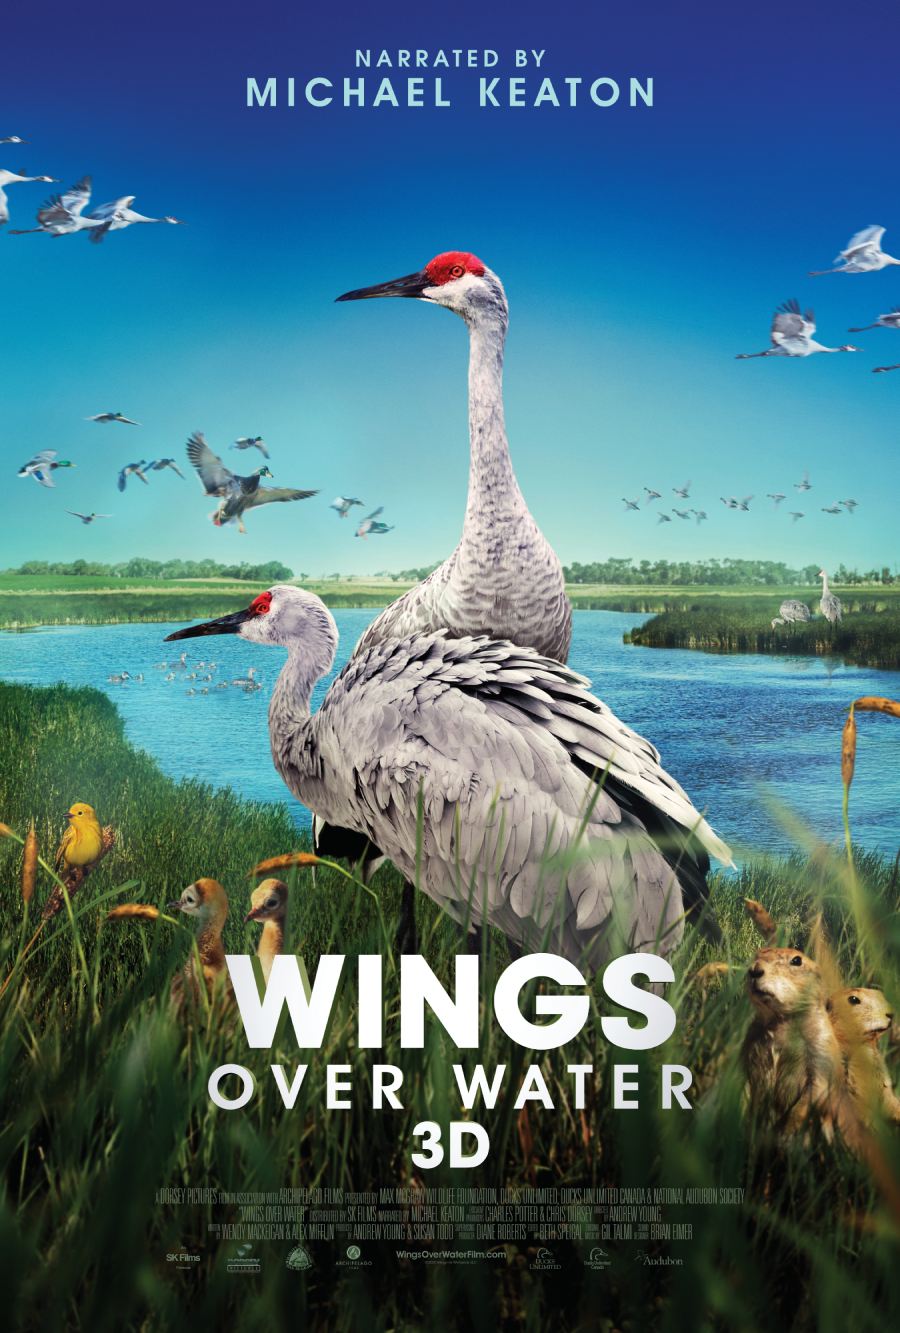 Wings Over Water by Wings for Wetlands